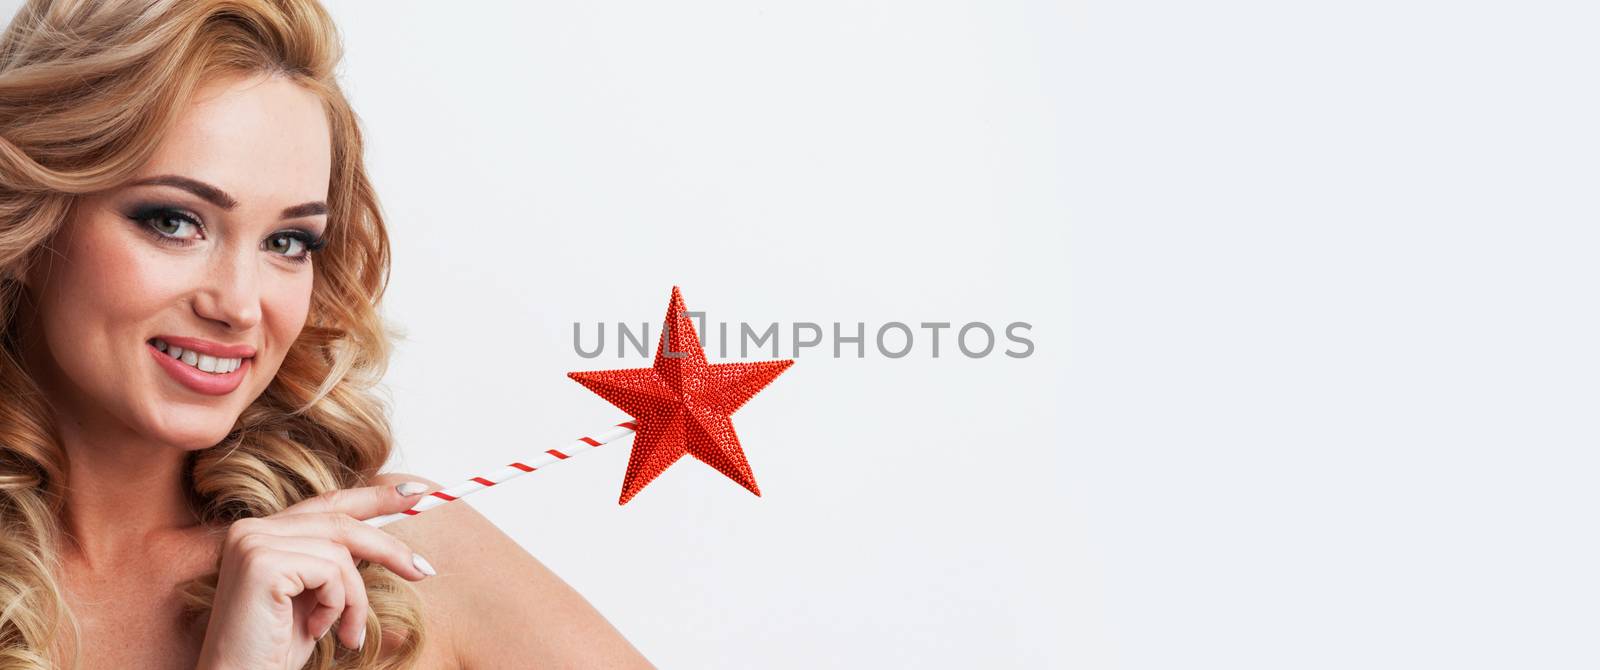 Fairy woman with magic wand with star pointing at white background with copy space for text